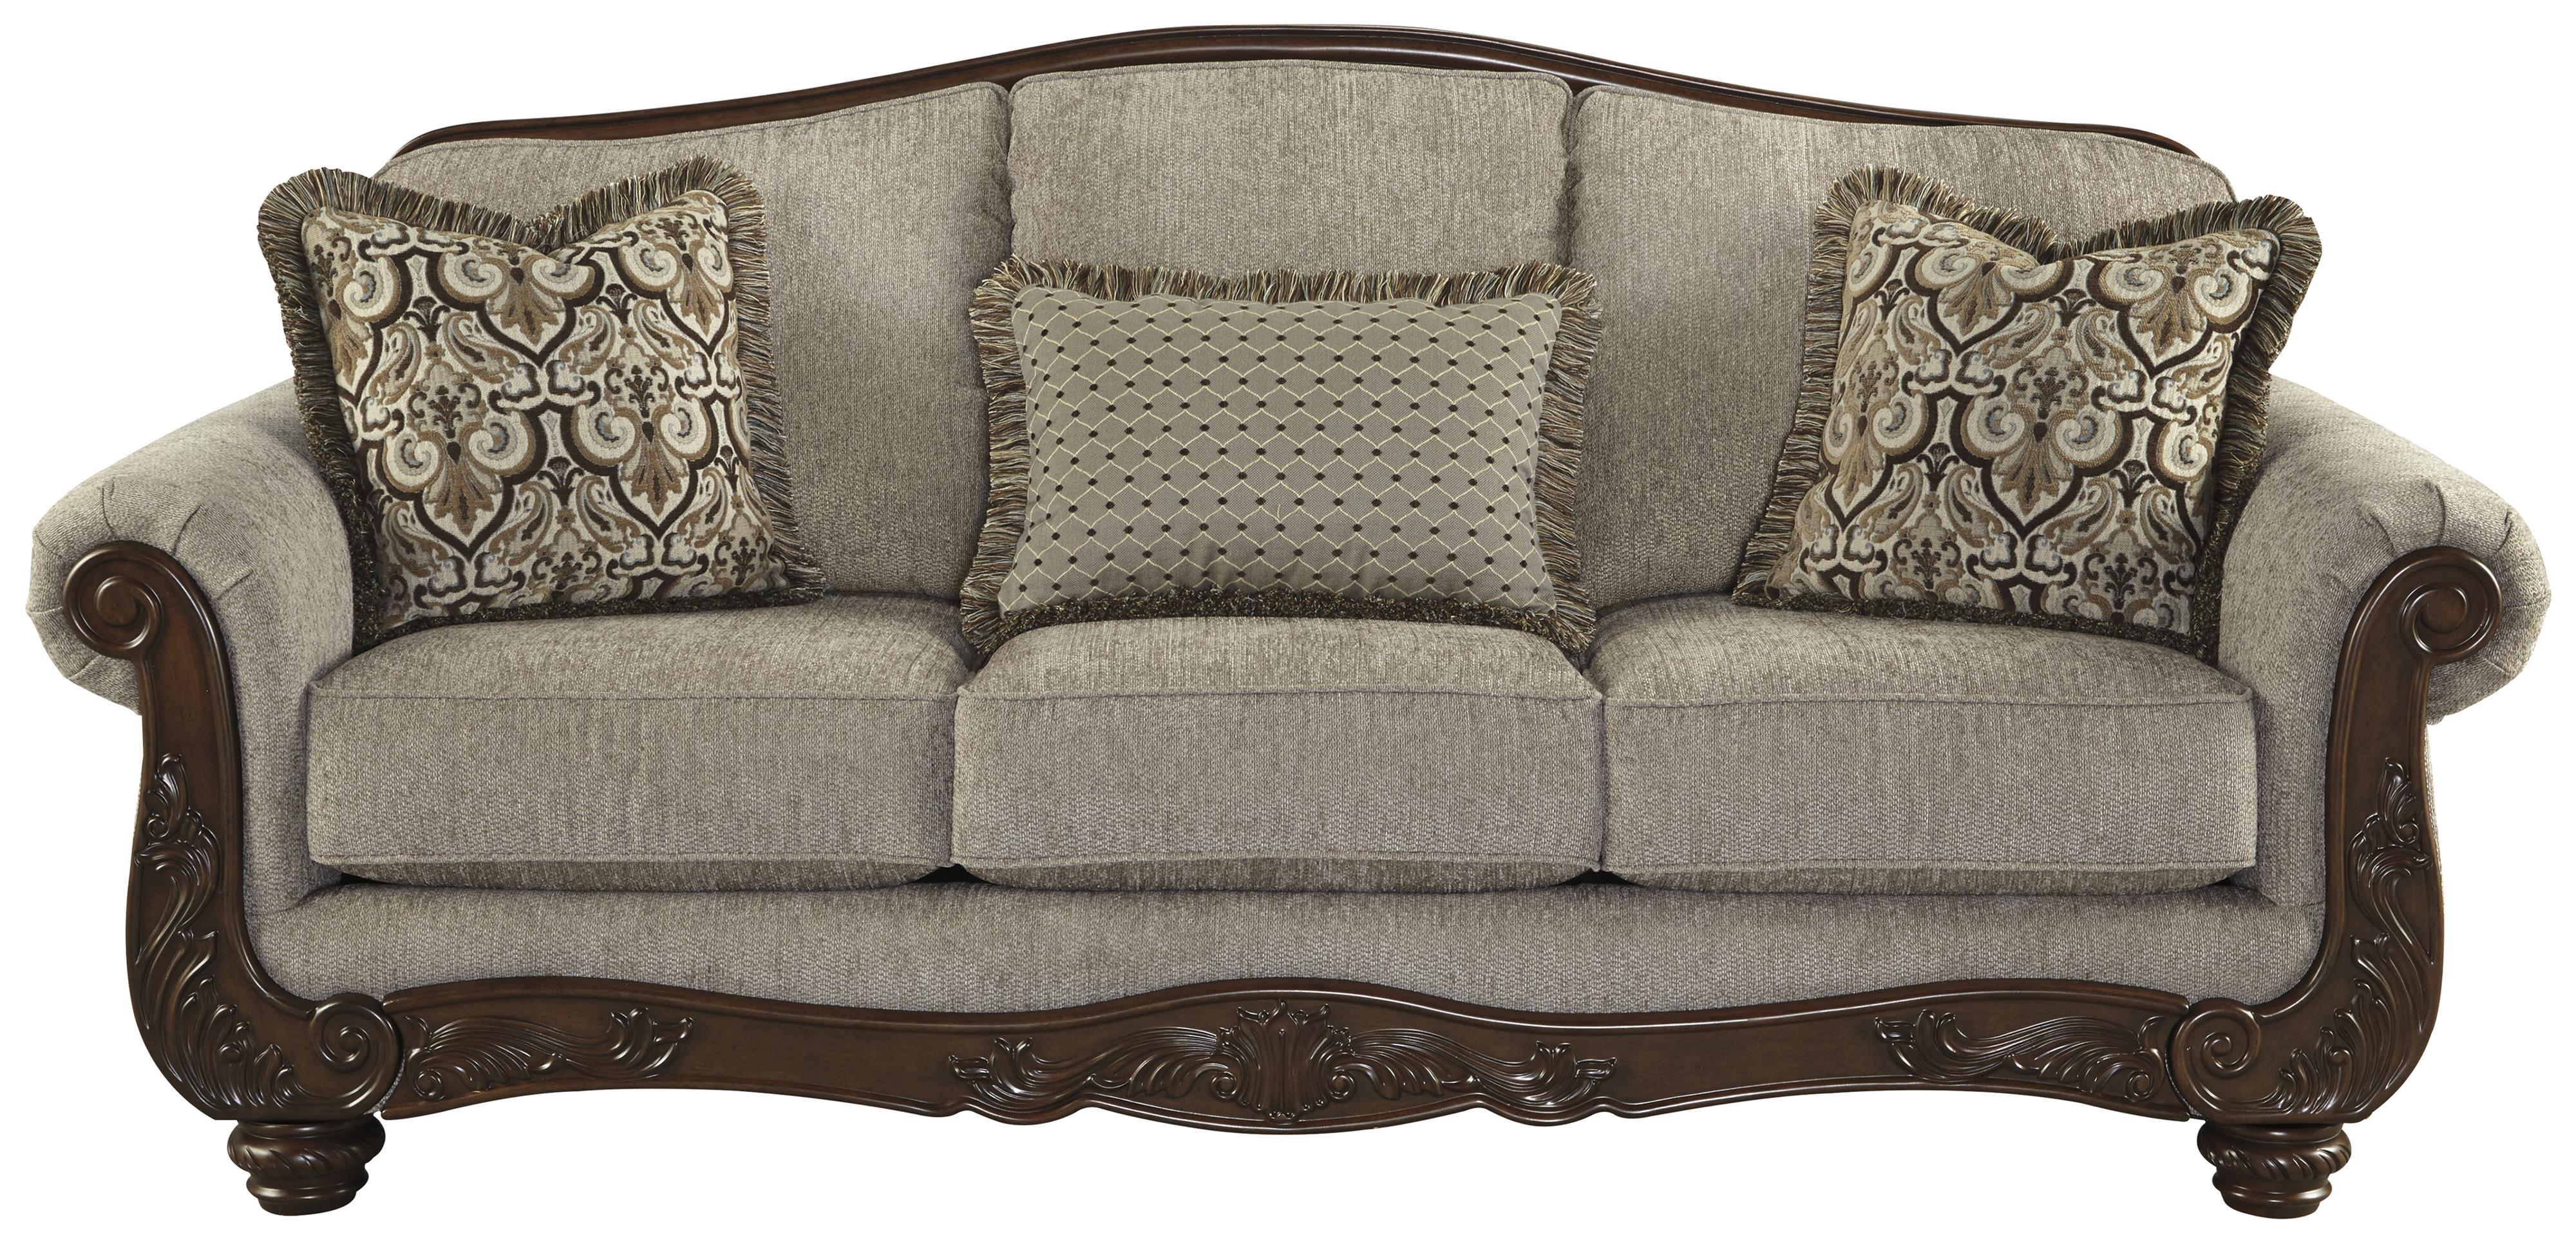 Cecilyn Traditional Sofa with Showood Trim & Camel Back by Signature Design  by Ashley